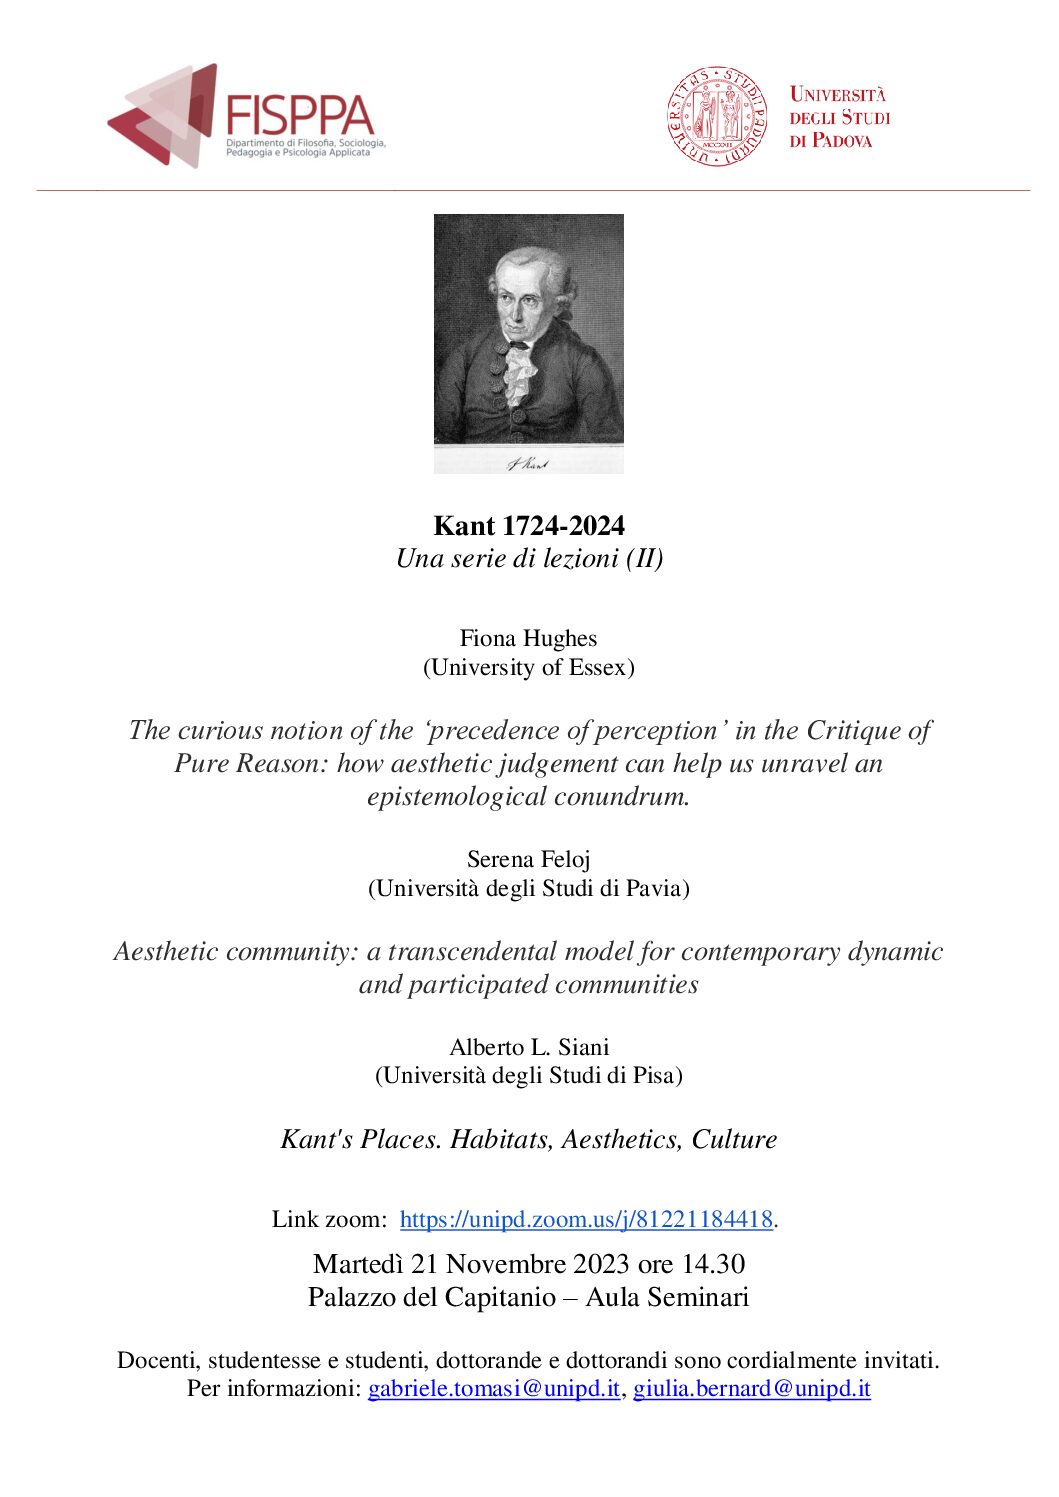 Conference: “Kant 1724-2024: A Series of Lectures, II” (Padova, 21 November 2023)